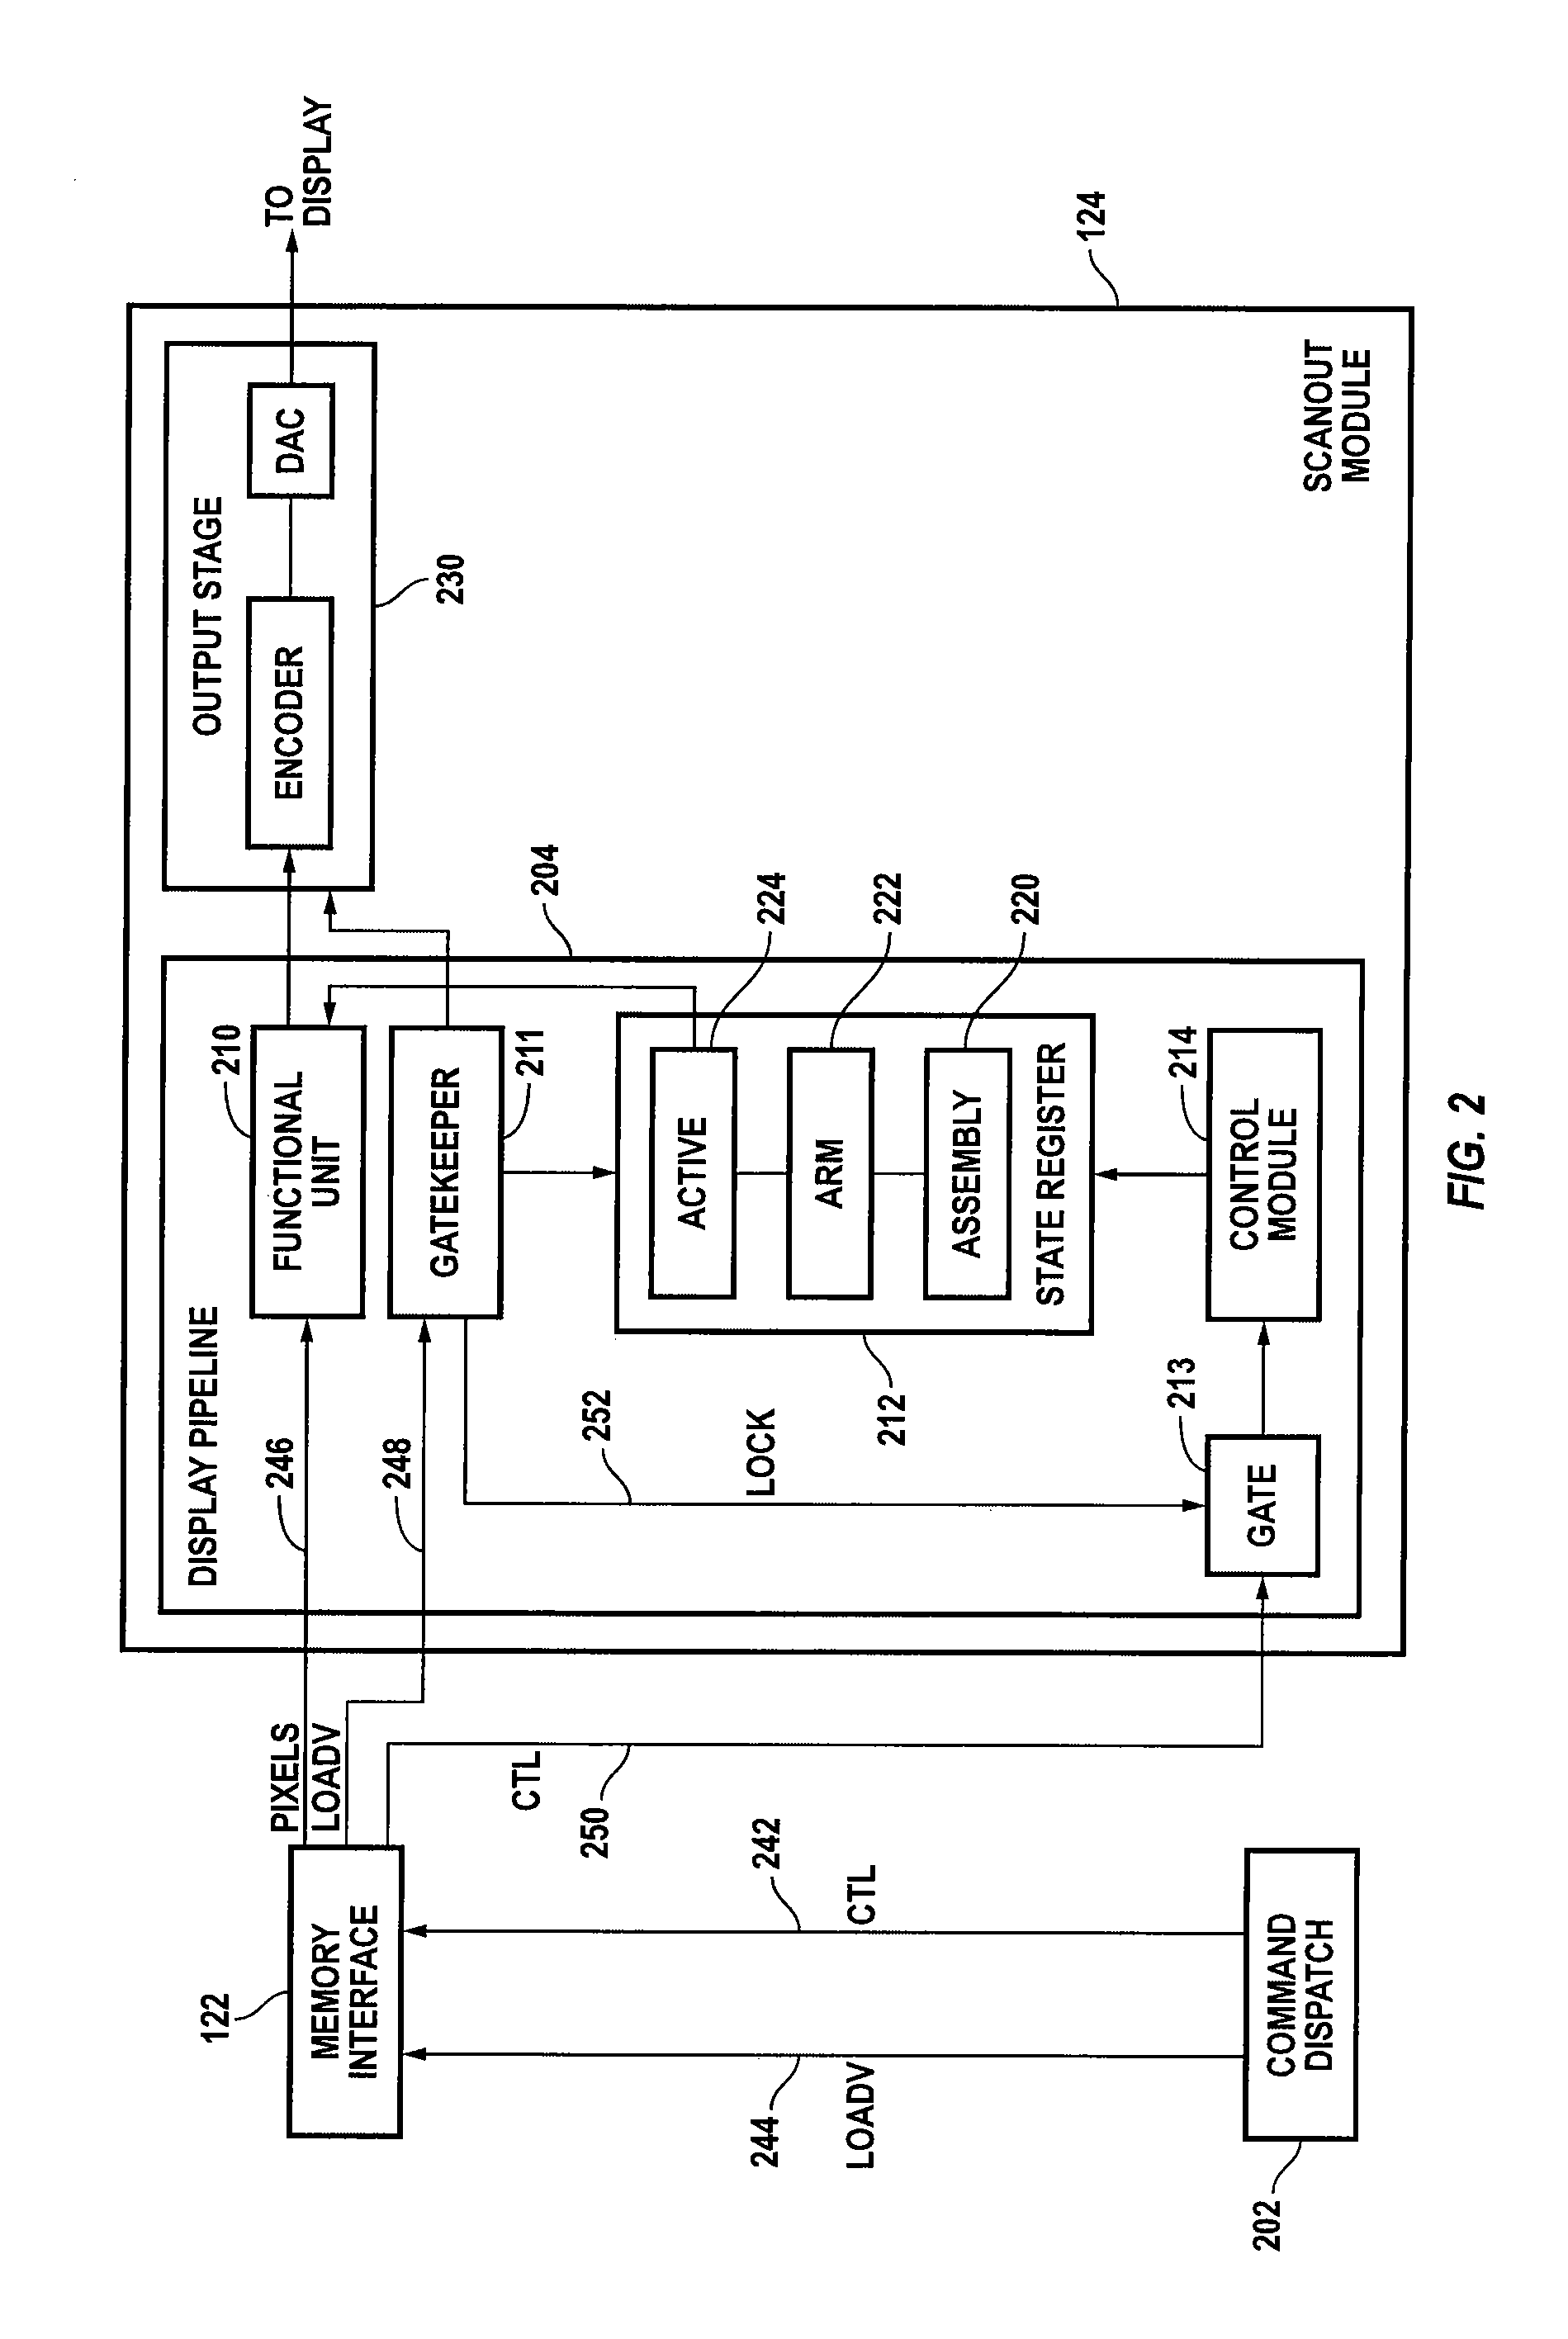 Isochronous pipelined processor with deterministic control